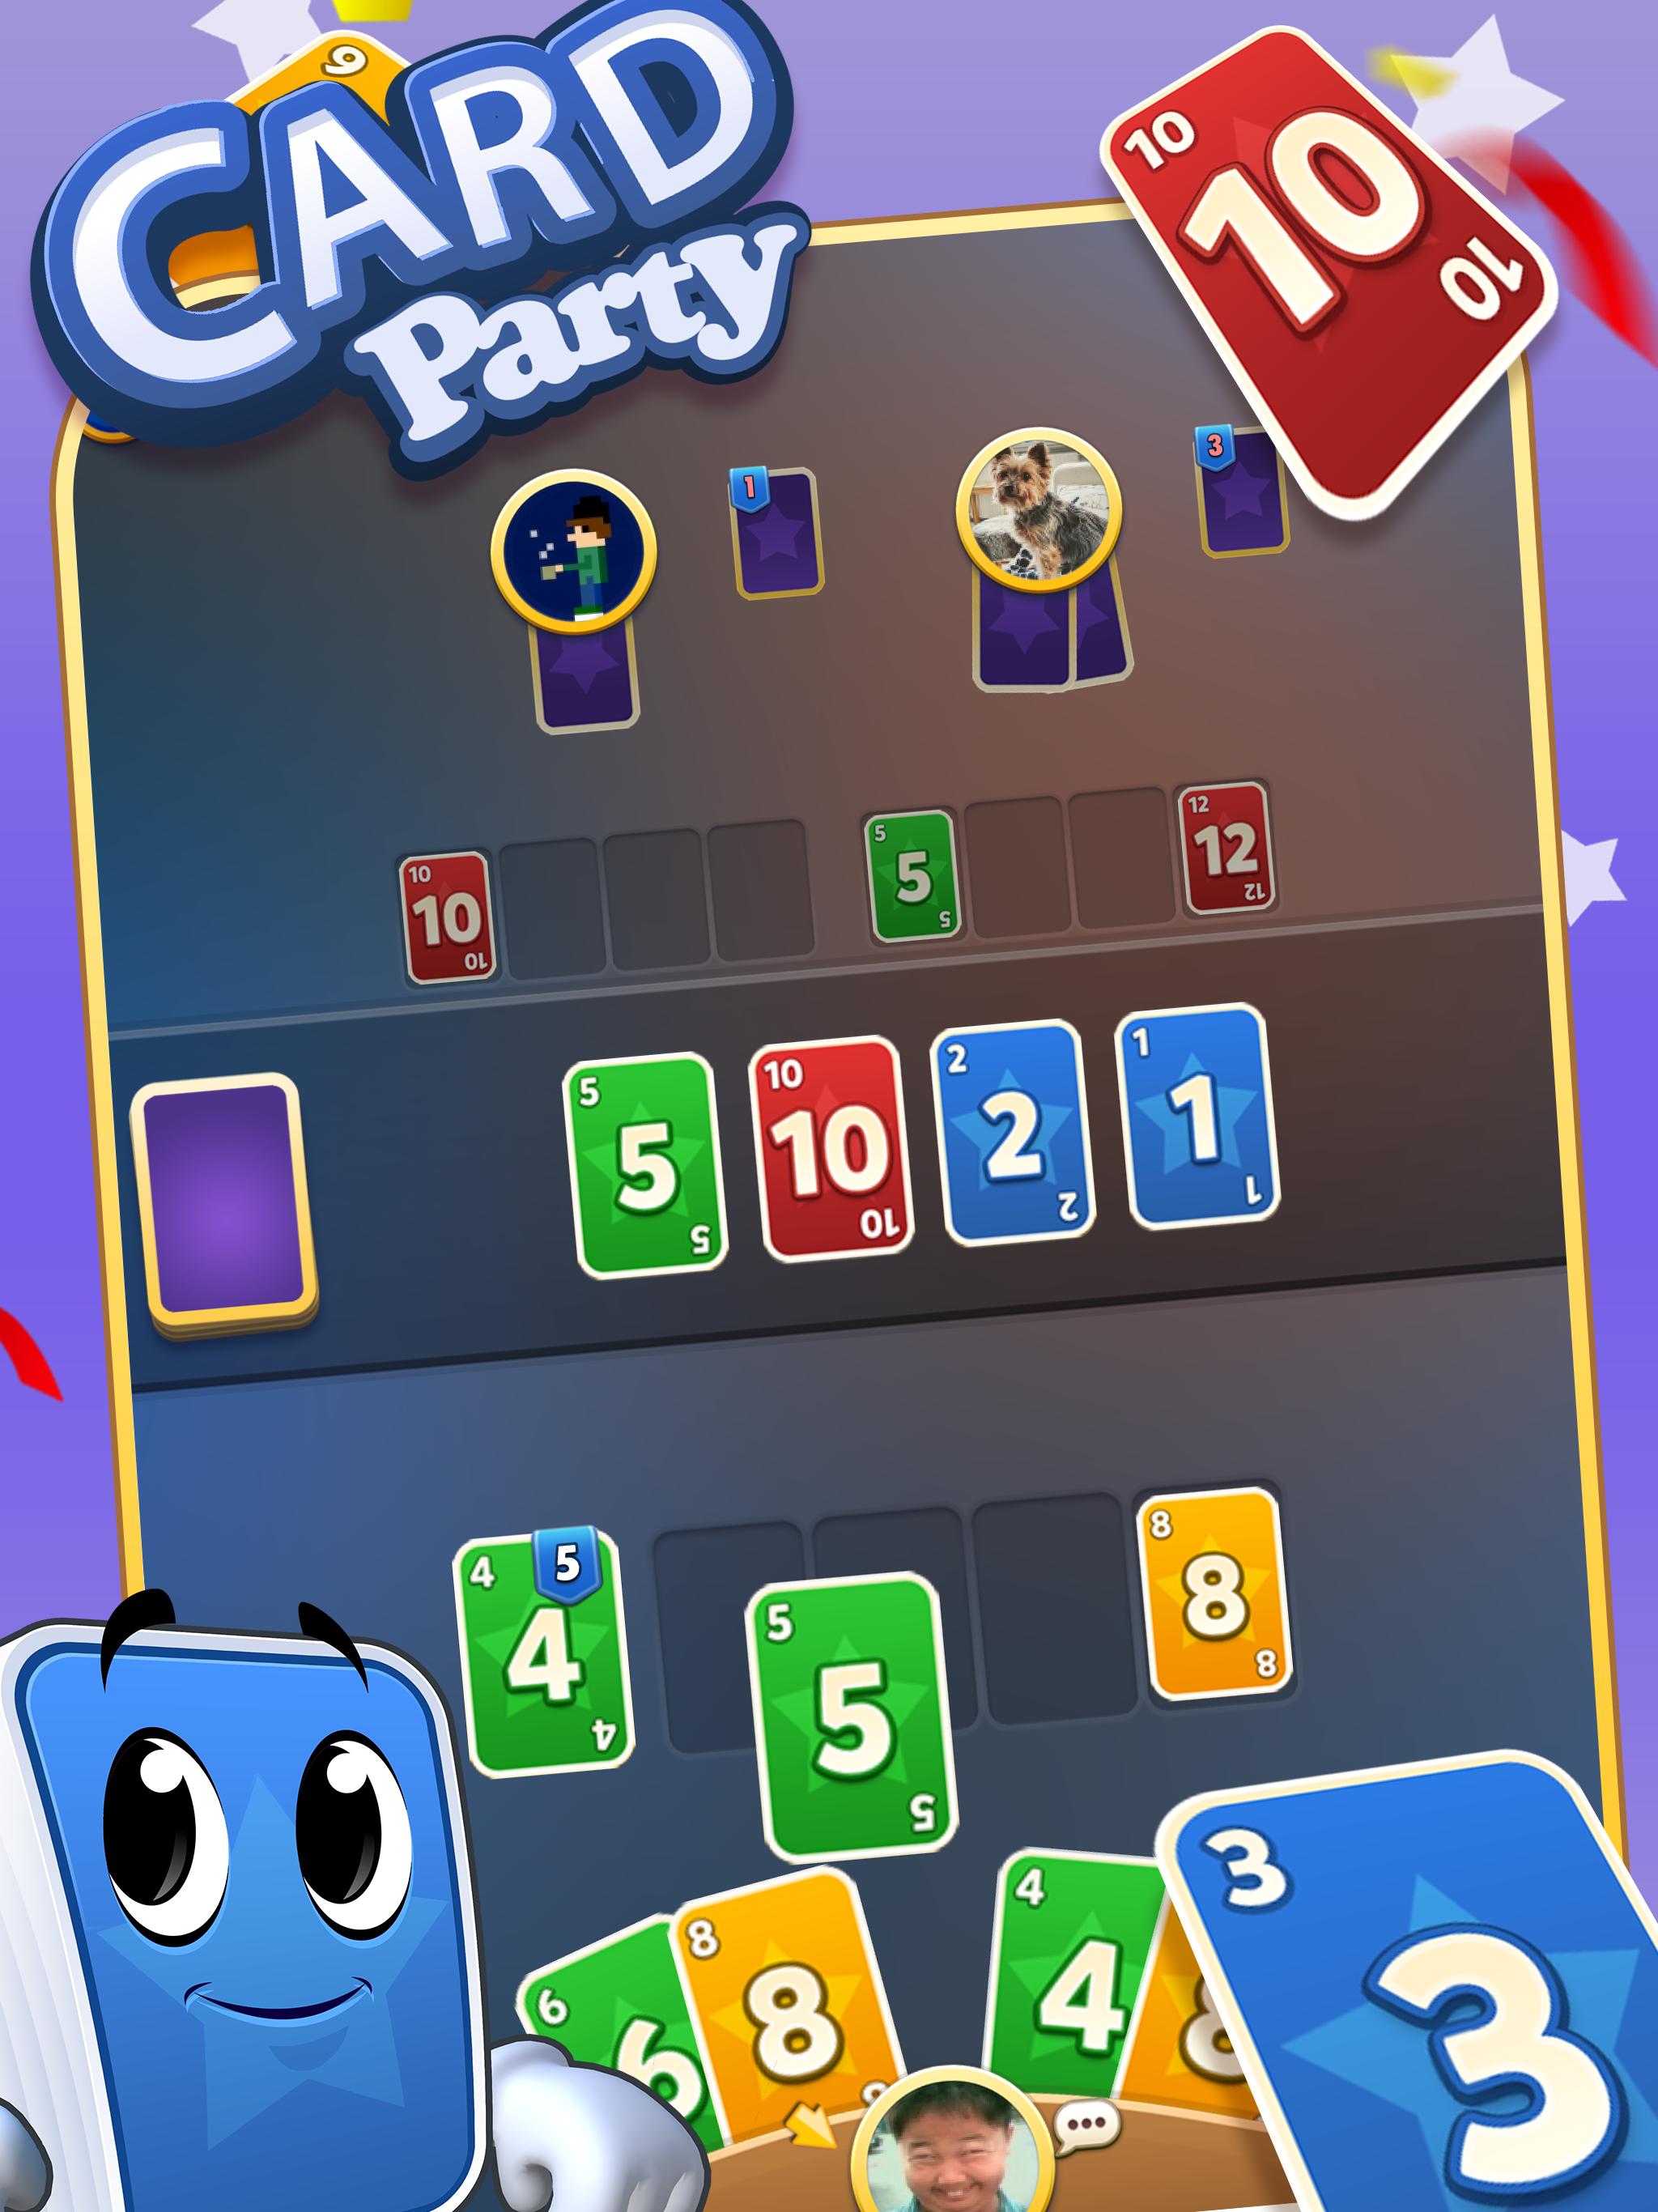 GamePoint CardParty 24357 Screenshot 10